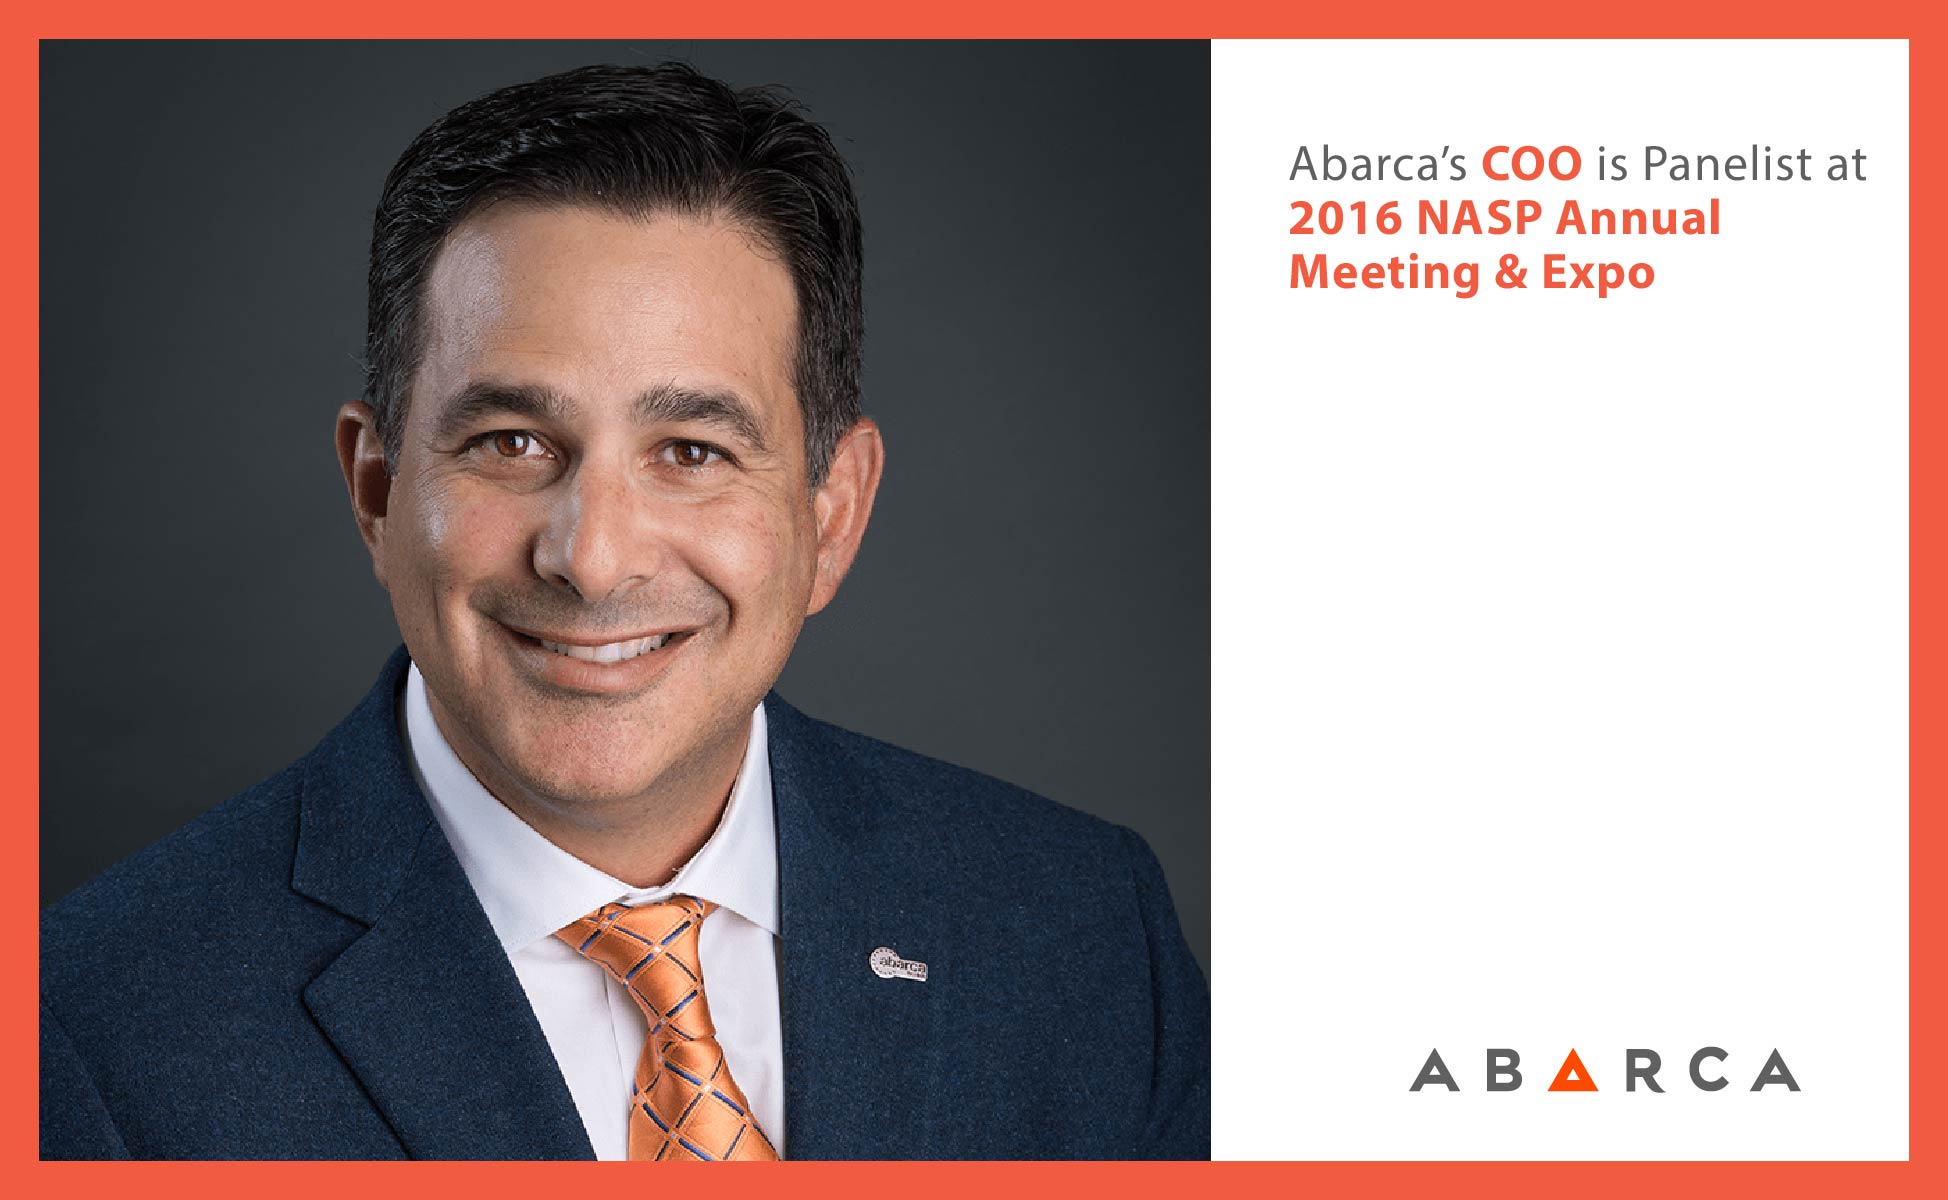 Abarca’s Chief Operating Officer, Javier Gonzalez, is a panelist at the 2016 NASP Annual Meeting & Expo